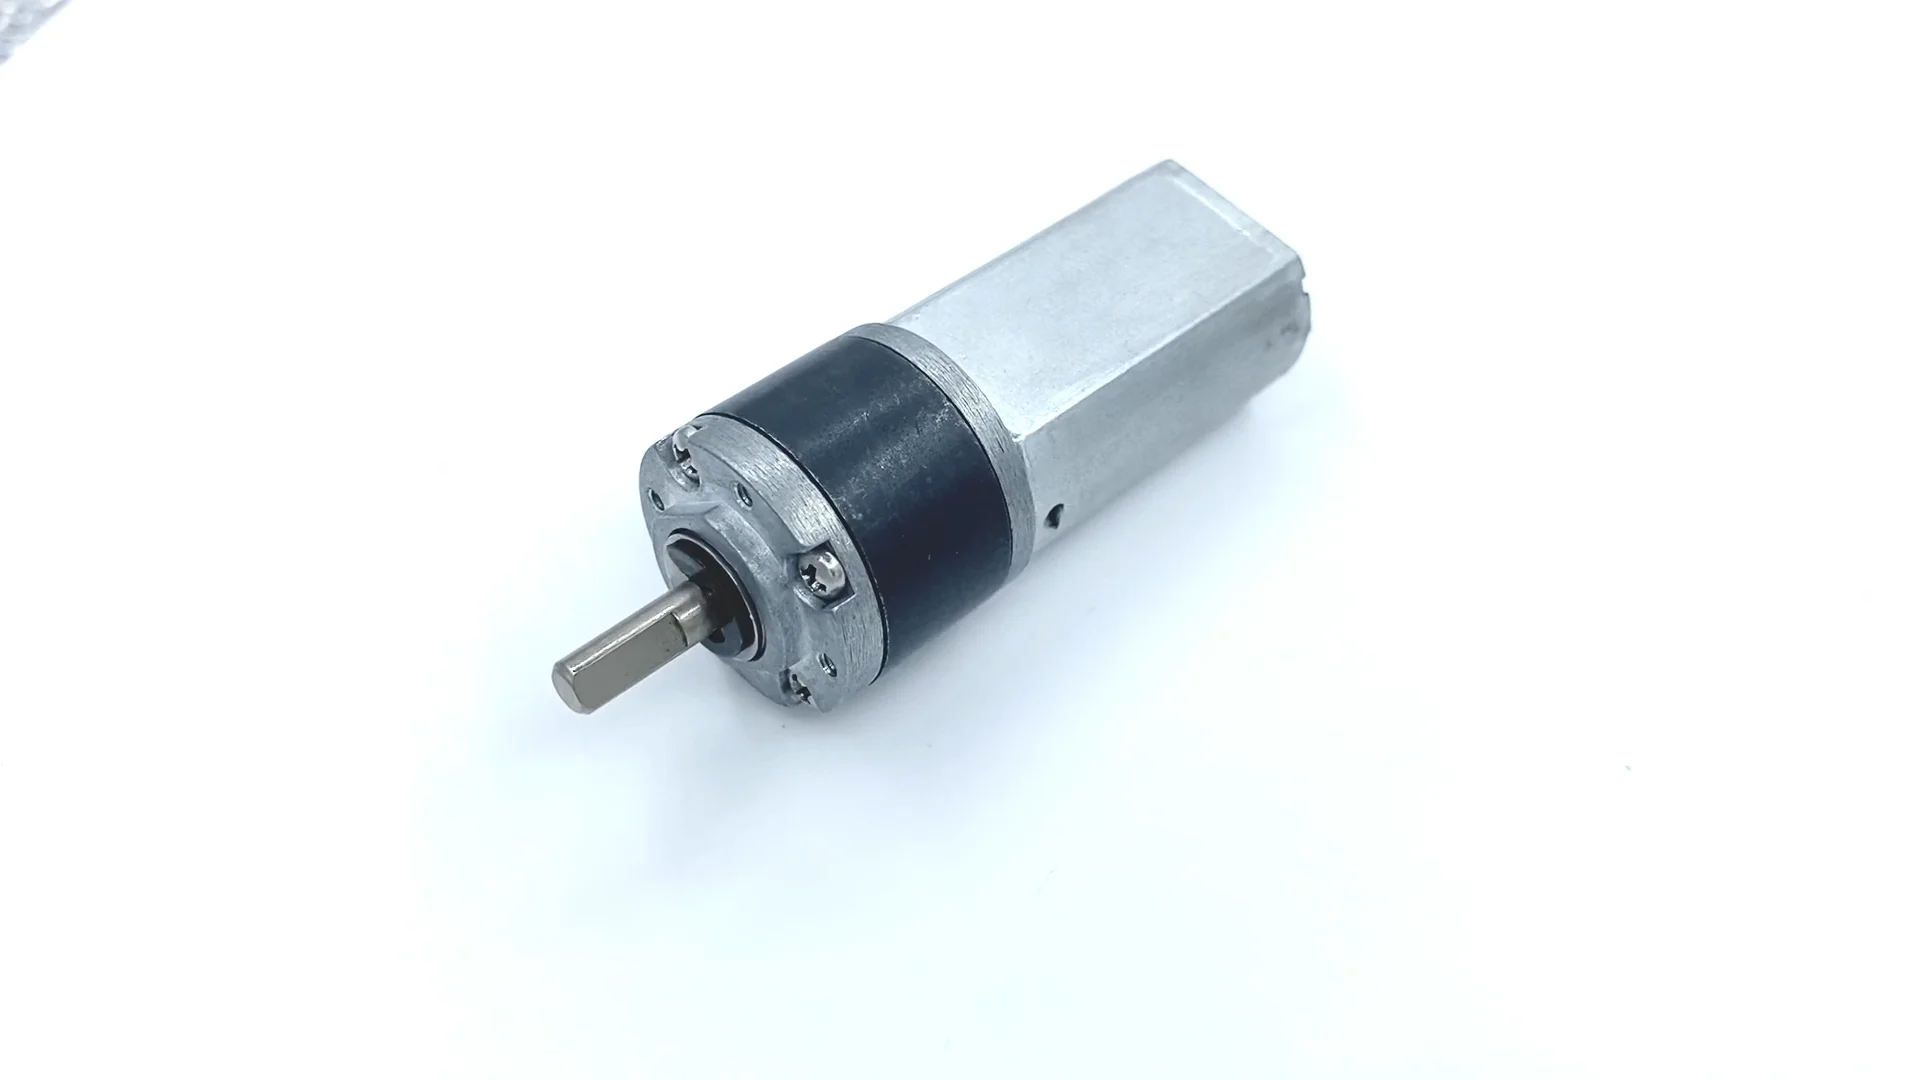 22mm gearbox 12V DC Motor,Planetary Gearbox Speed Control,Low 40 RPM,12mm shaft 